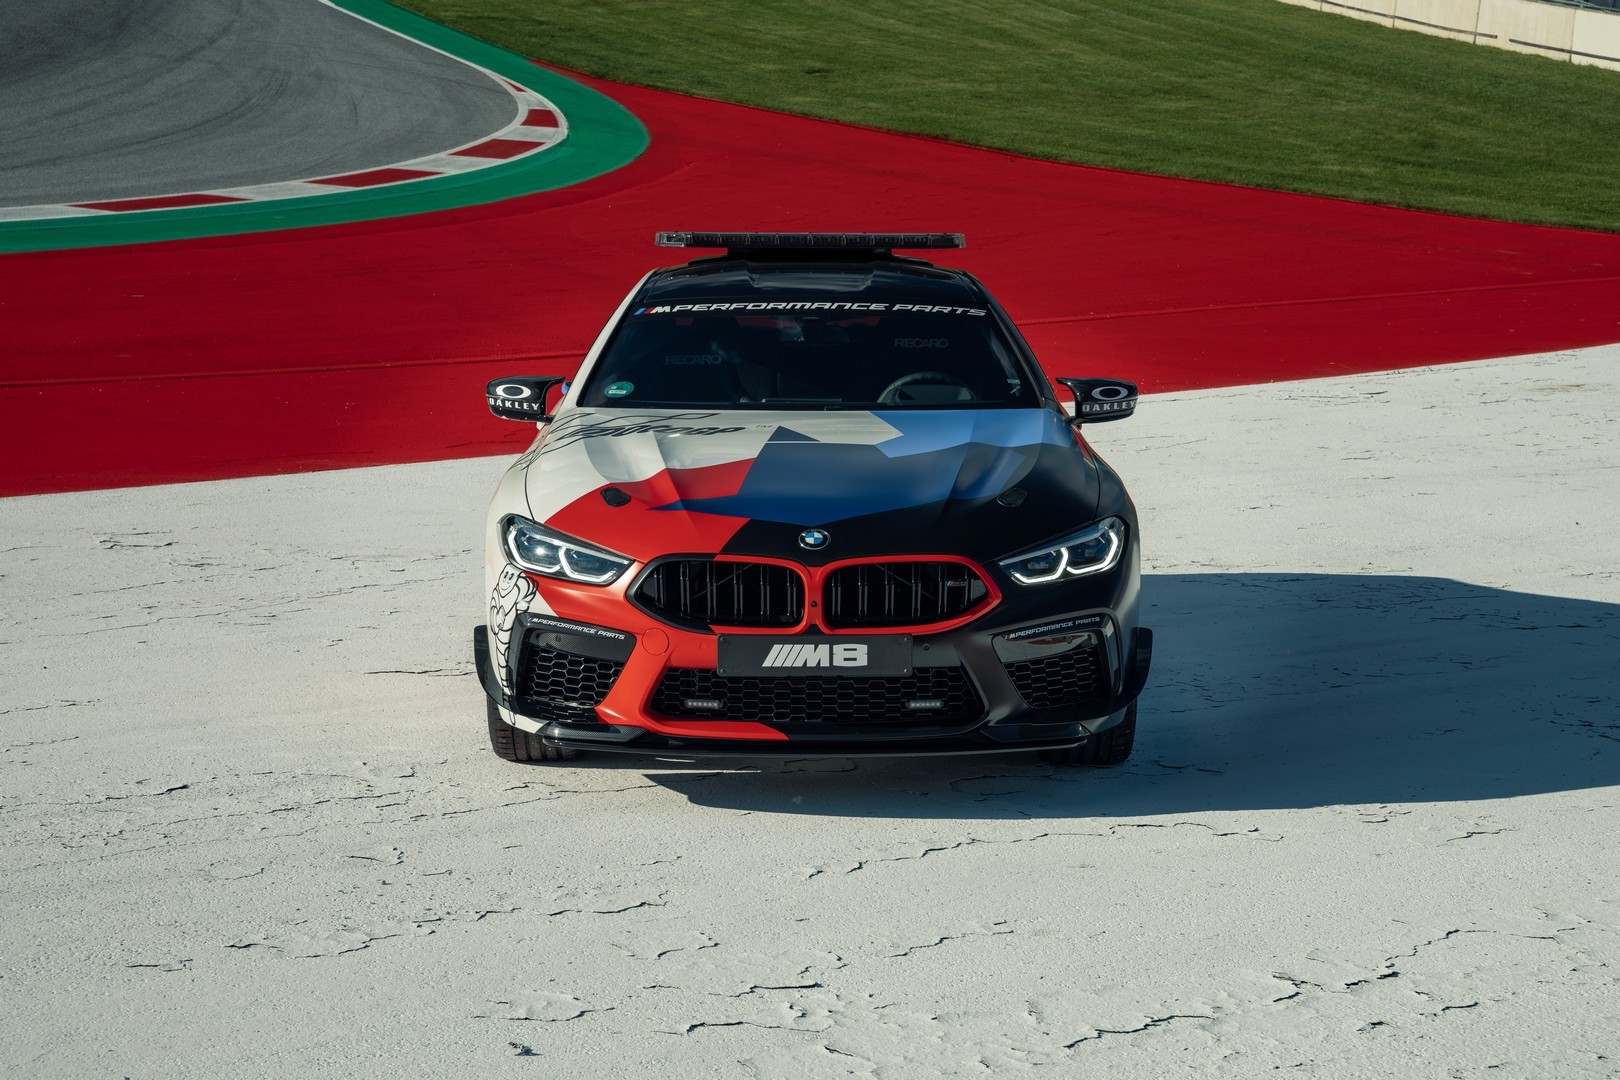 2019 - [BMW] Série 8 Gran Coupé [G16] - Page 7 Bmw-surprisingly-turned-the-new-m8-gran-coupe-into-a-safety-car-for-motogp_8